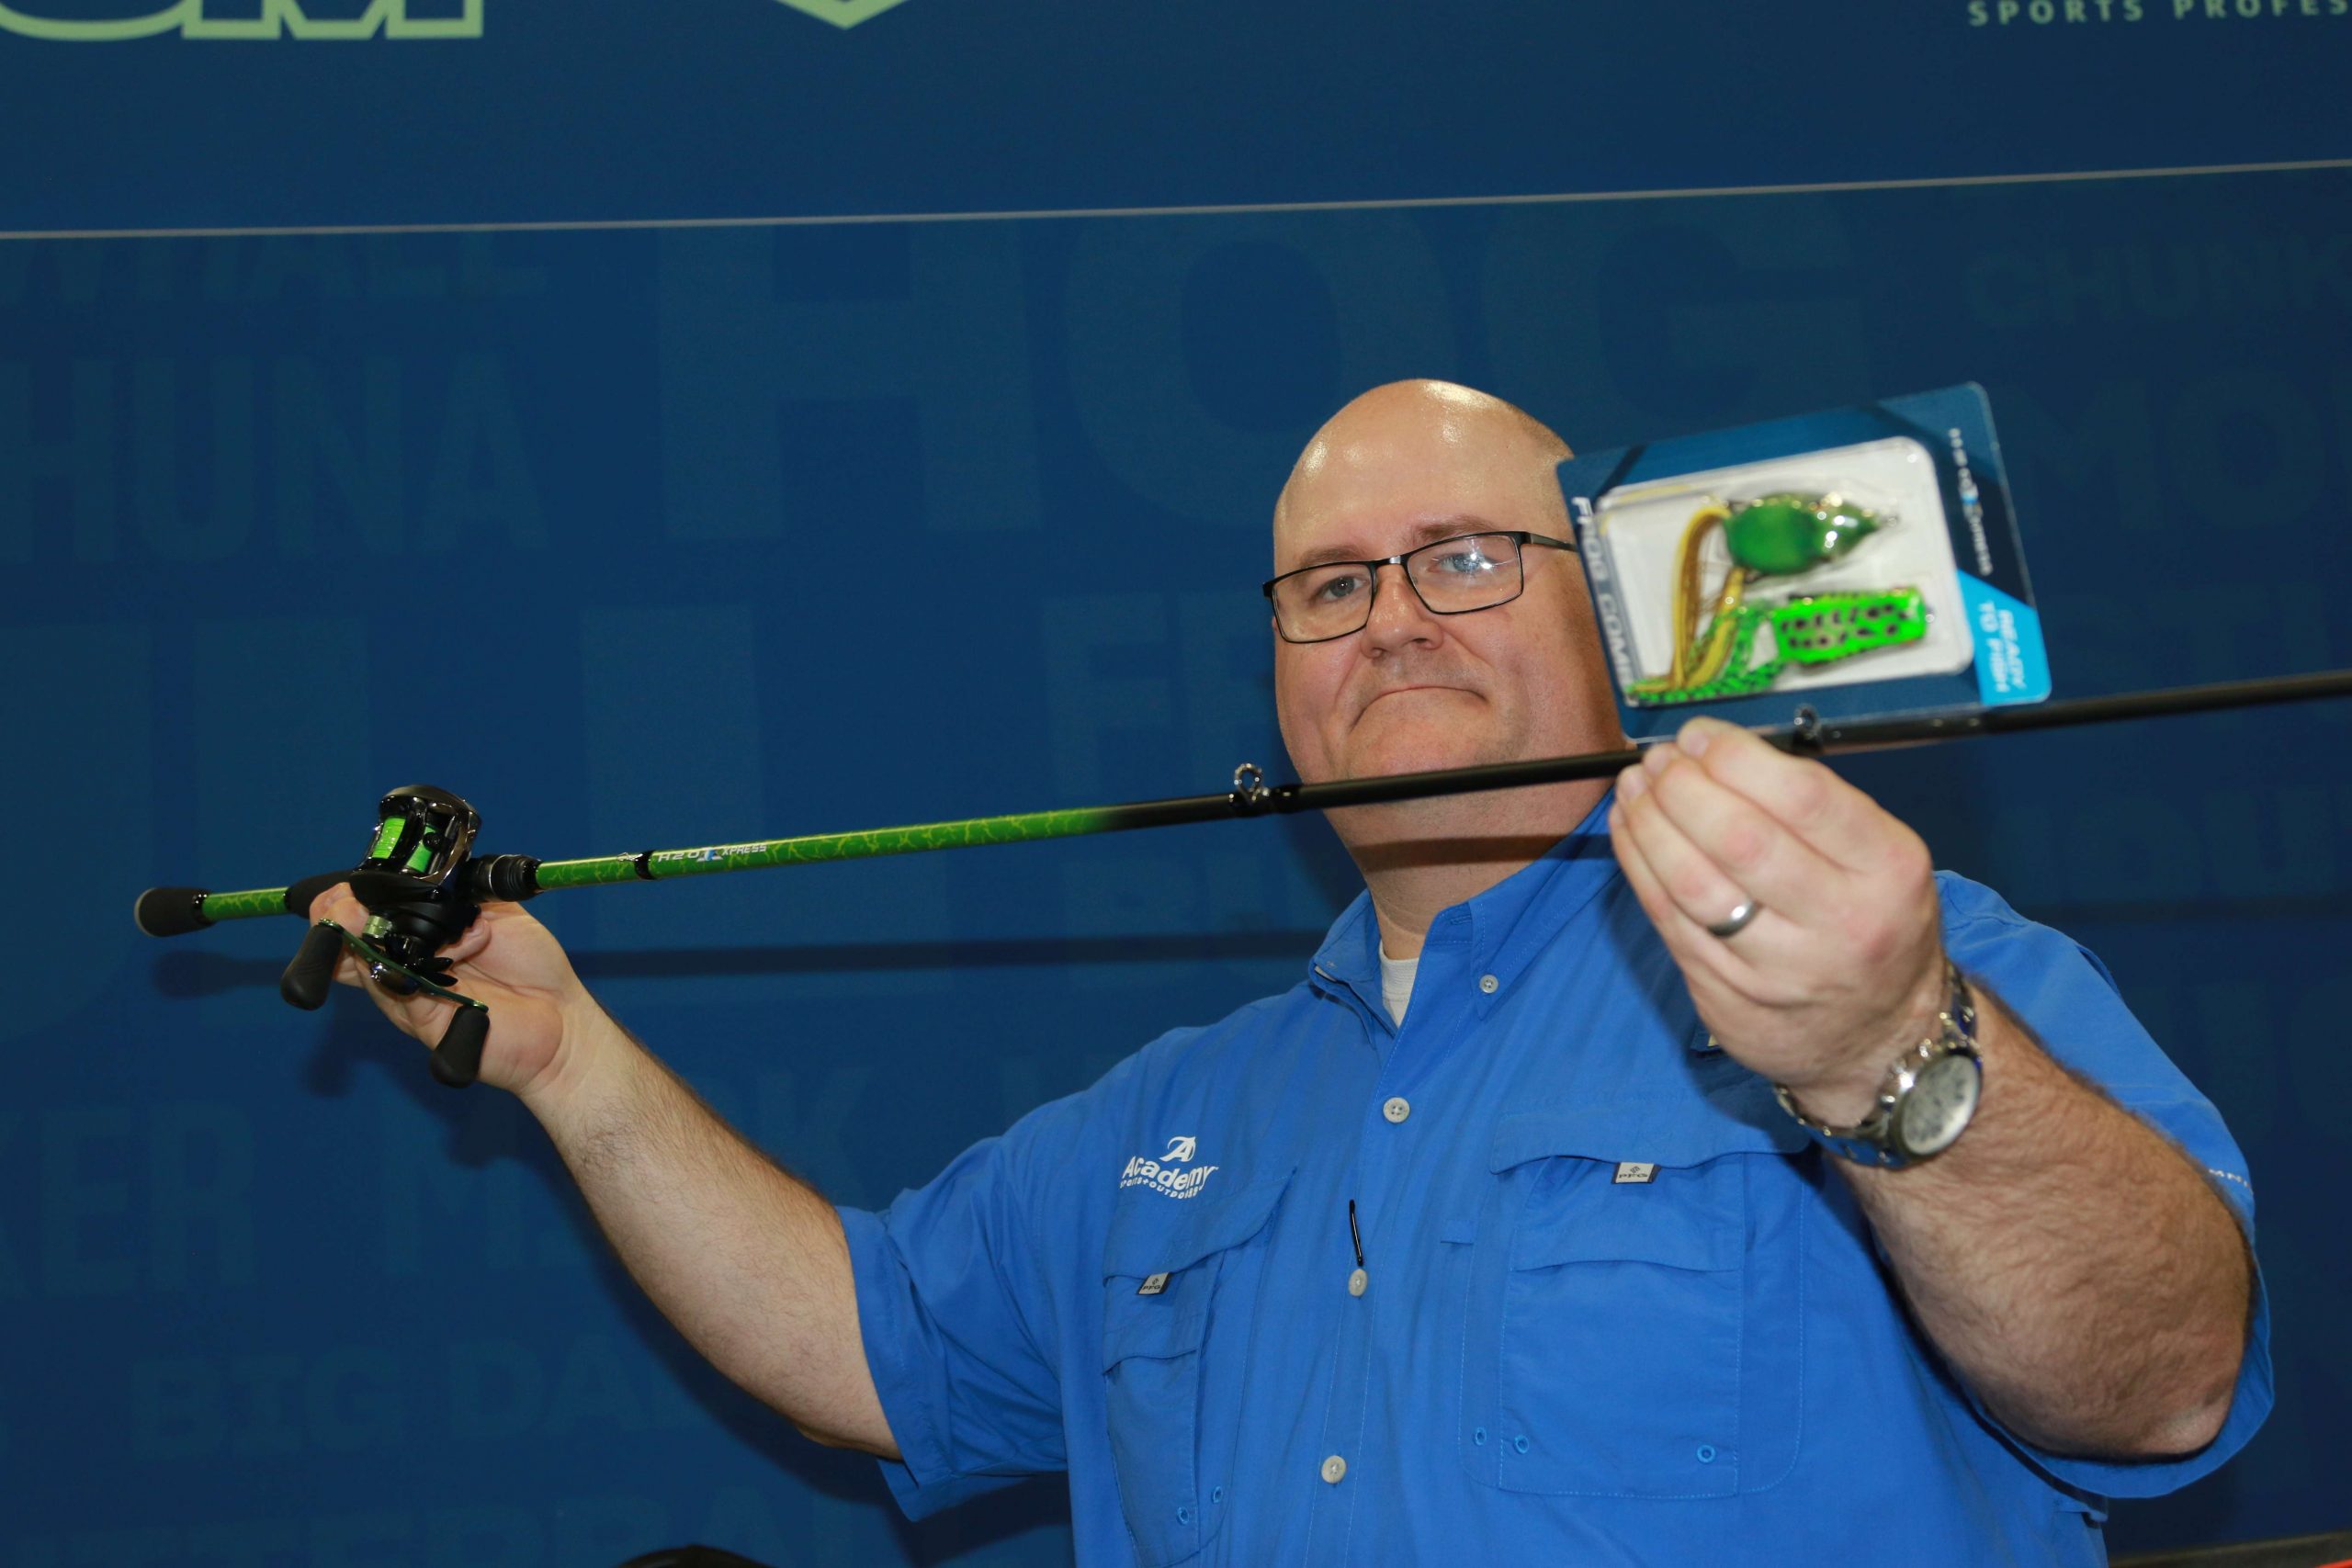 Mike Nelson of Academy Sports & Outdoors shows off one of the companyâs latest introductions â a rod/reel combo specifically packaged for frog fishing, complete with braided line and two frog styles. 